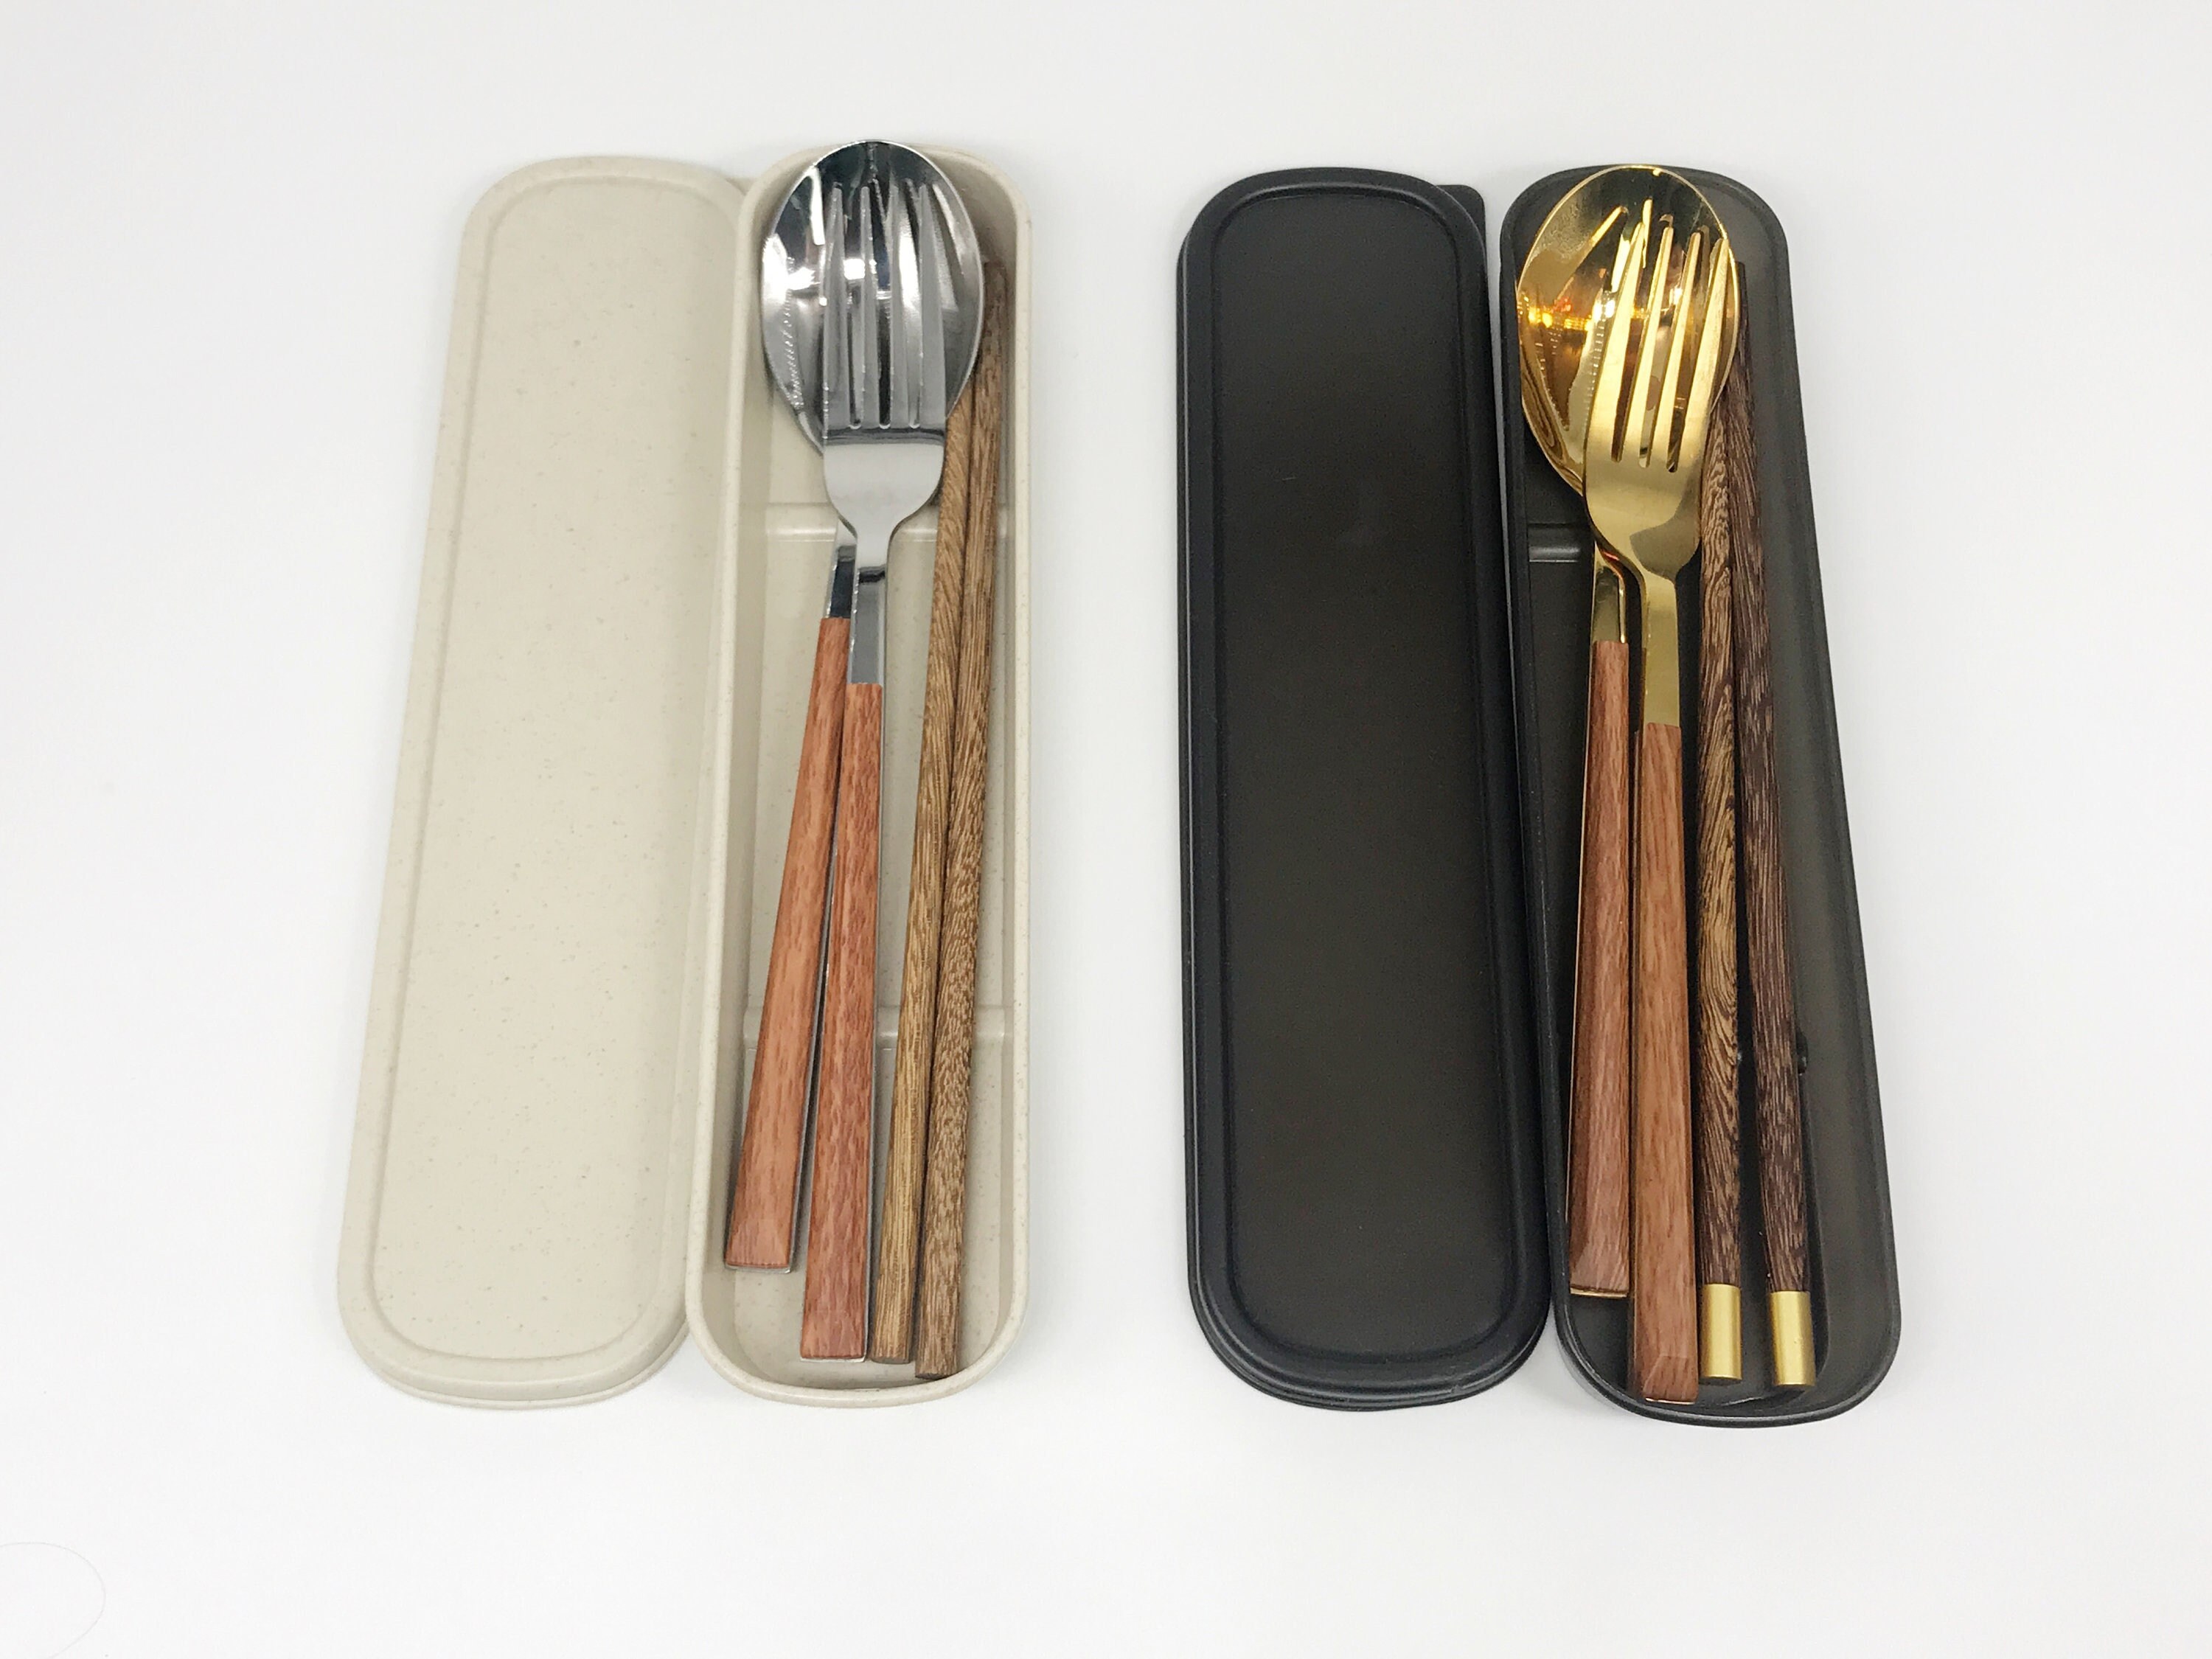 Stainless Steel Travel Utensil Set in Metal Case - TS01 - IdeaStage  Promotional Products